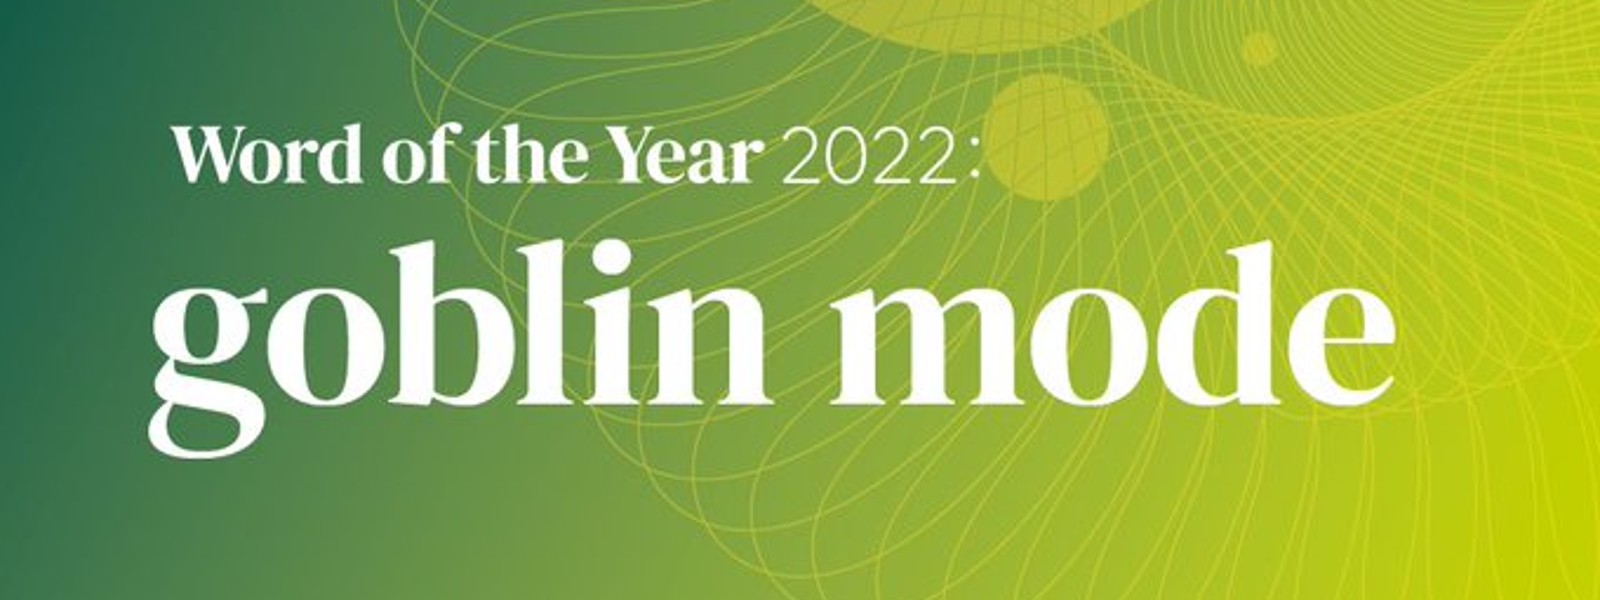 'Goblin mode' is Oxford Word of the Year 2022